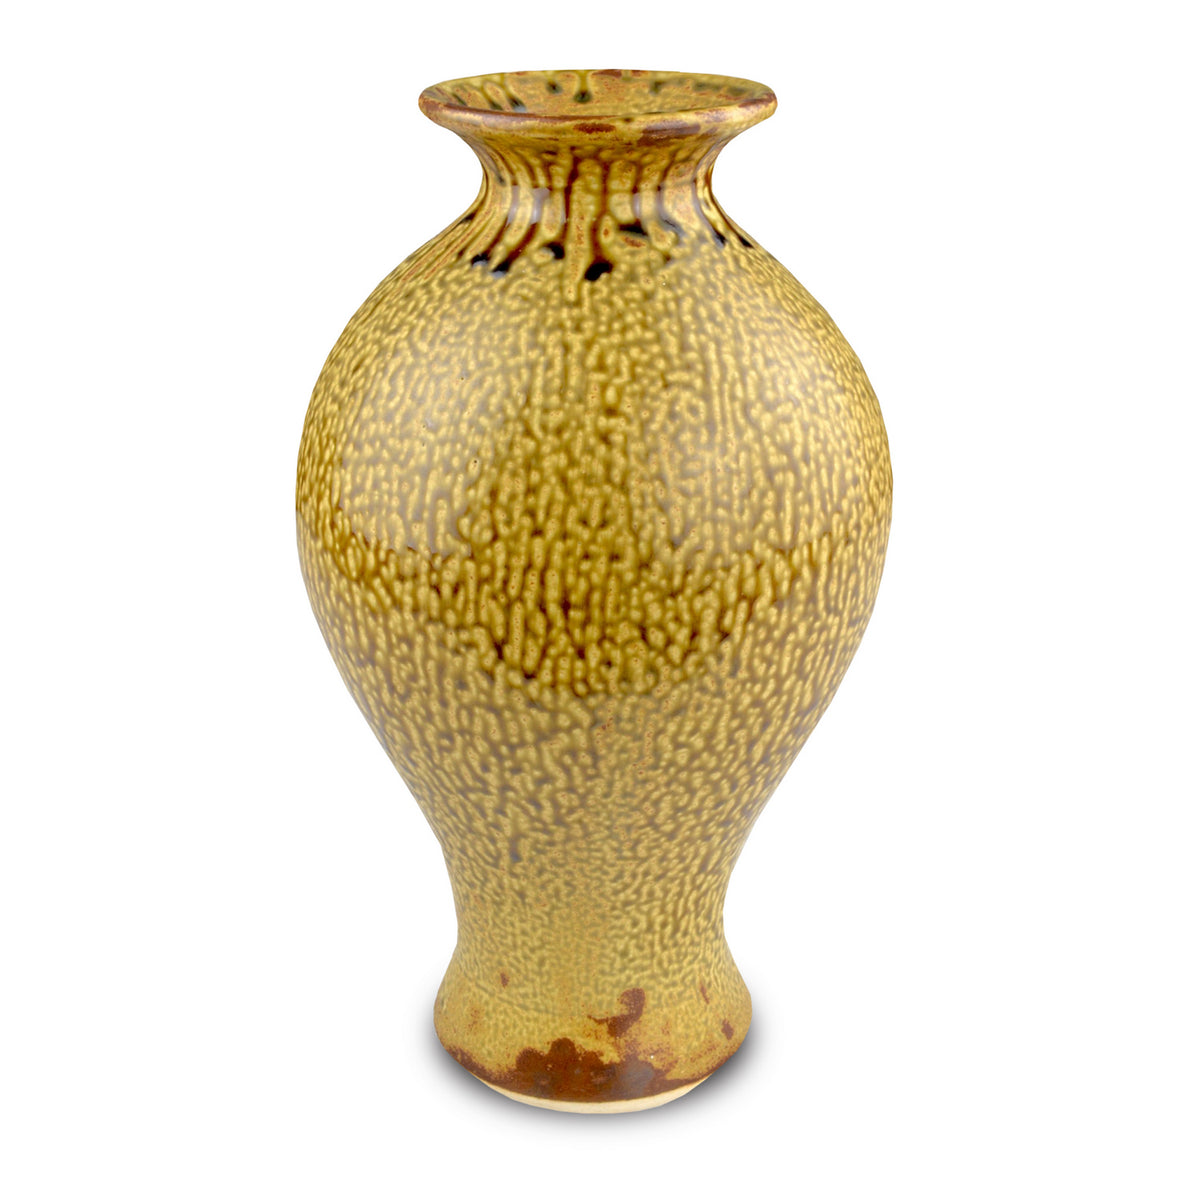 Currey and Company Vase Set of 3 from the Zlato collection in Yellow/Gold Brown finish